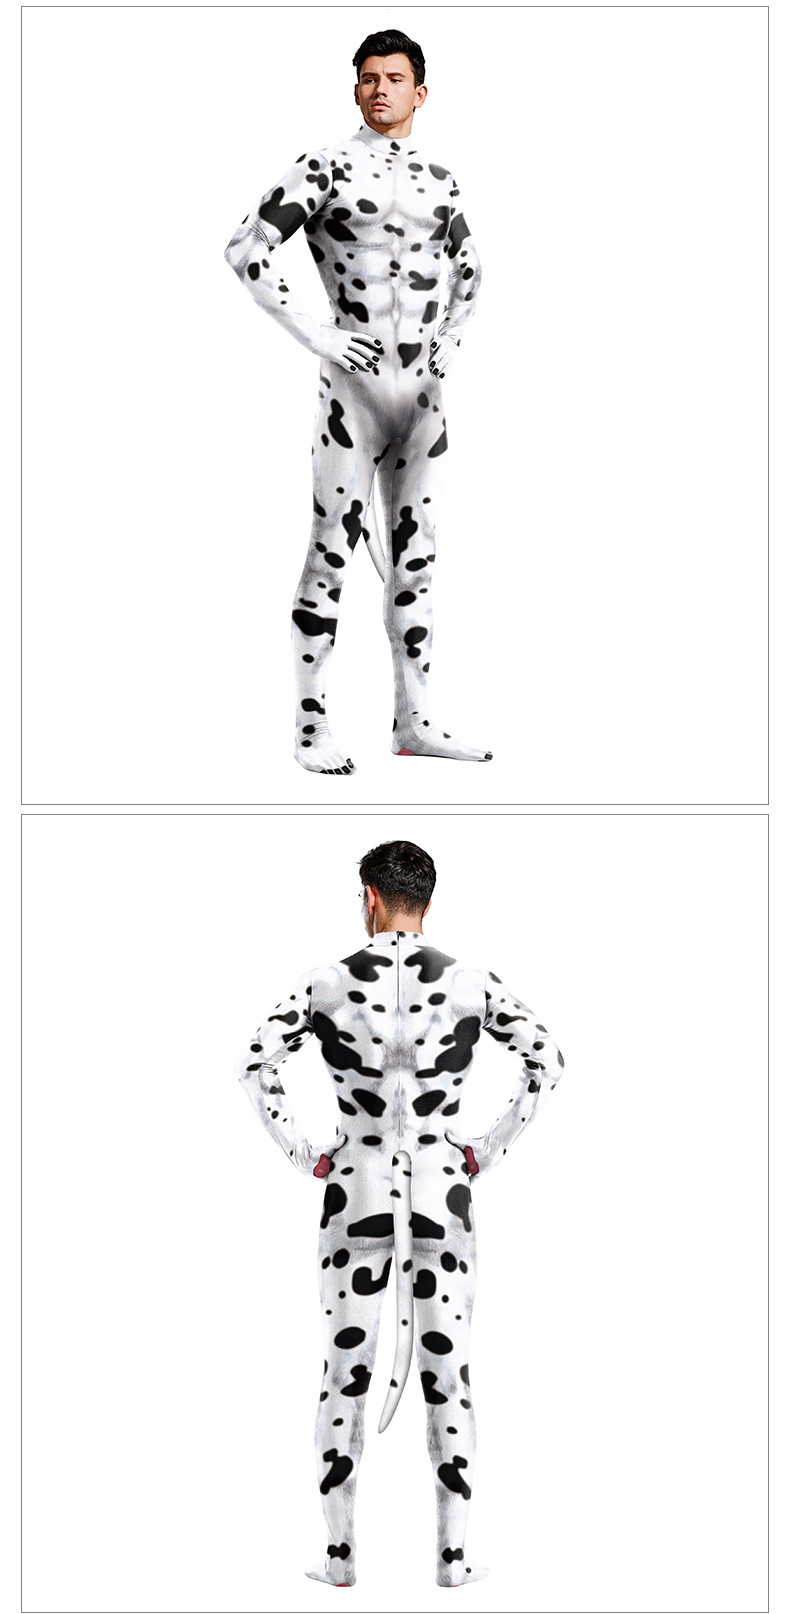 milk cow 3d print jumsuit for boy - stage perfermance costume - front and back detail